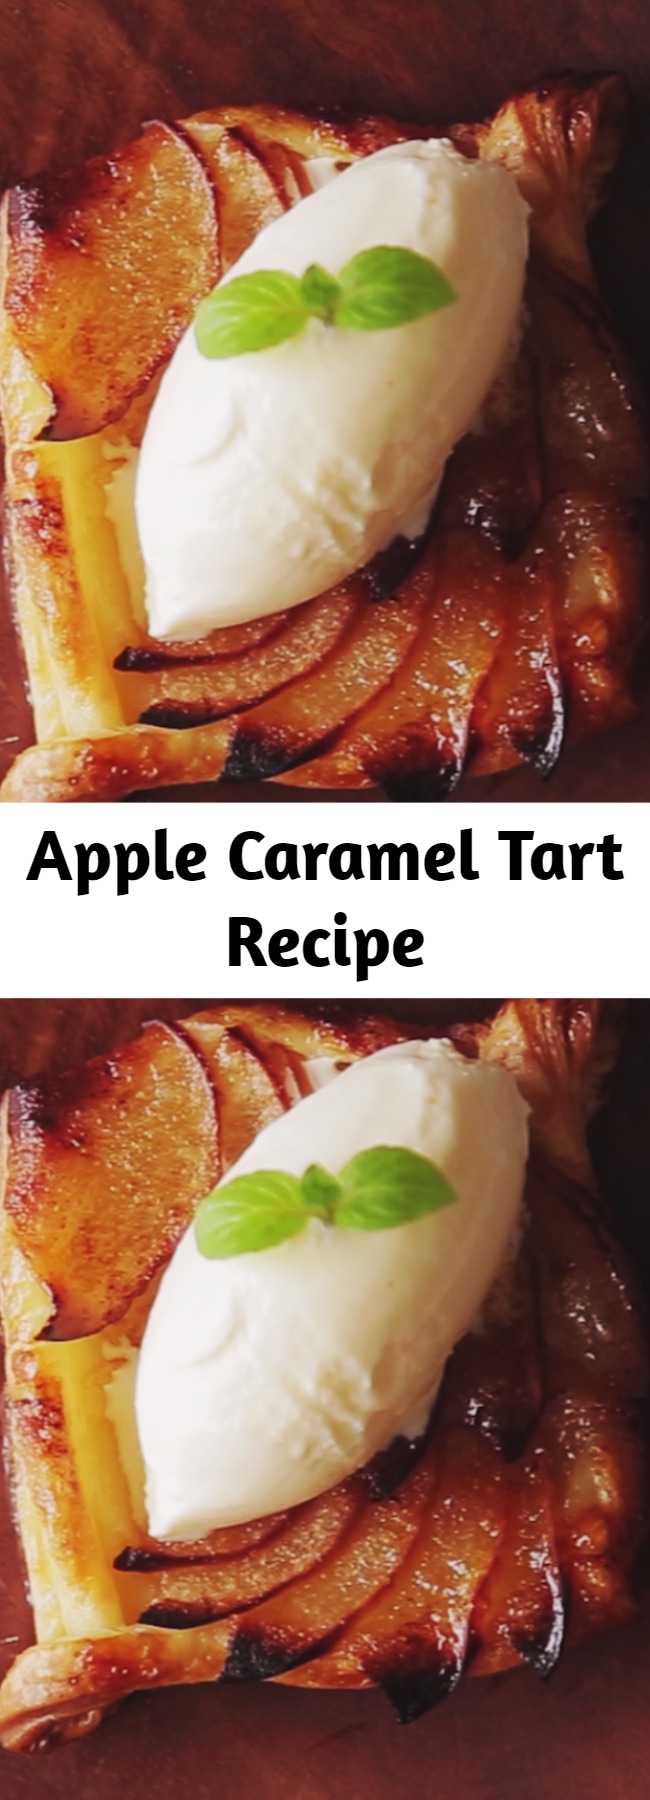 Apple Caramel Tart Recipe - Who doesn't love a fruit dessert that is delicious, pretty and topped with ice cream? Because everyone loves desserts that are both pretty and sweet.